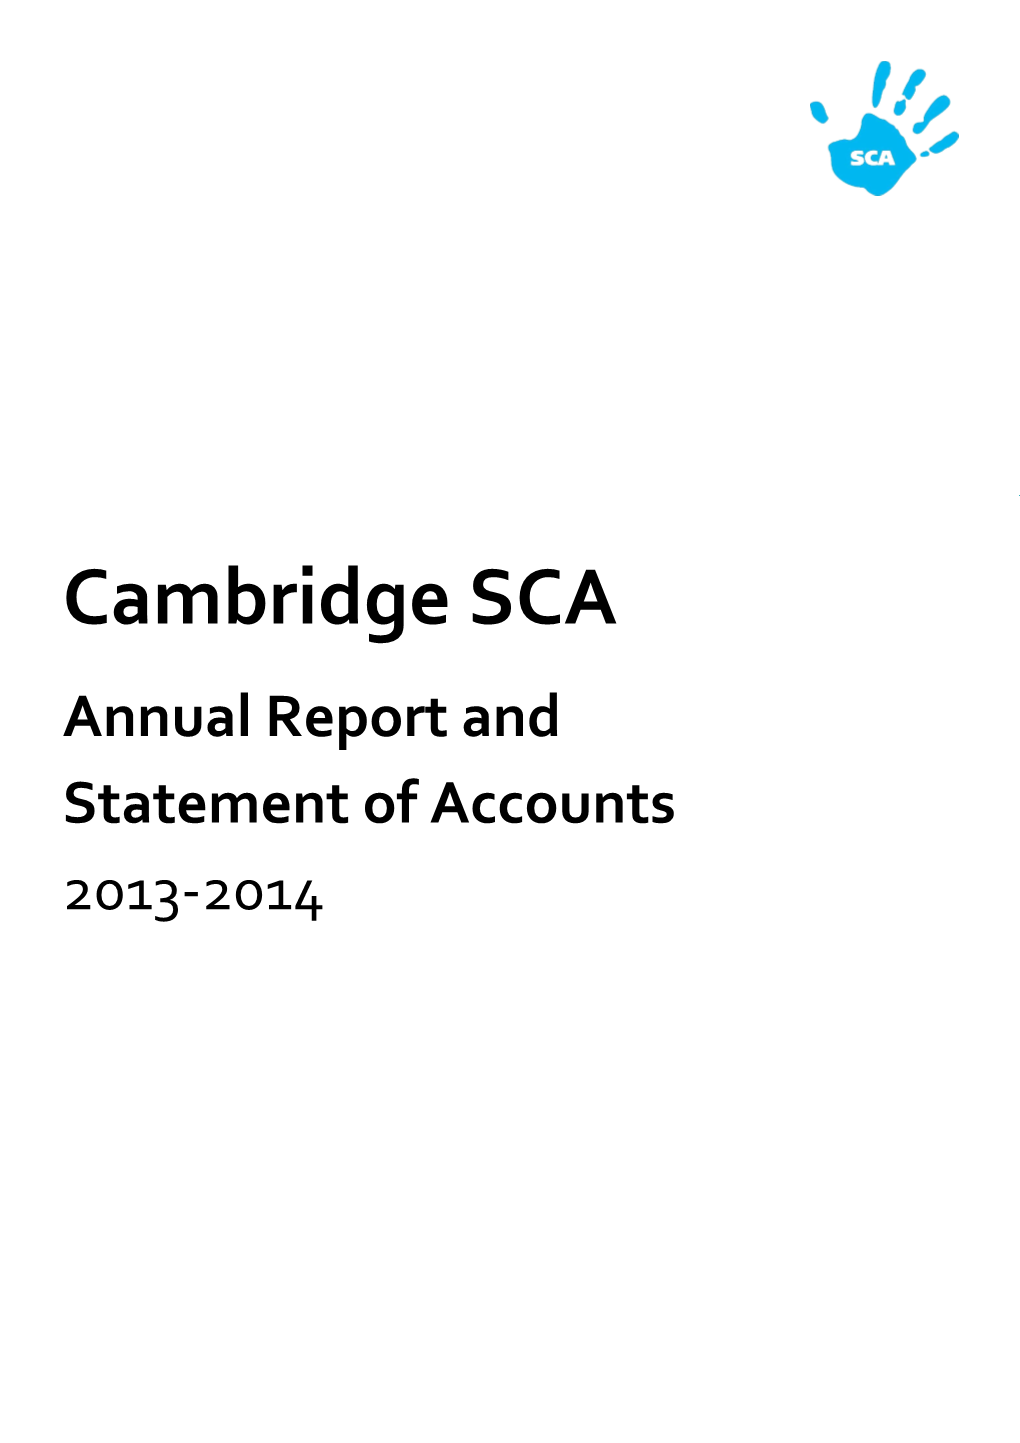 Cambridge SCA Annual Report and Statement of Accounts 2013-2014